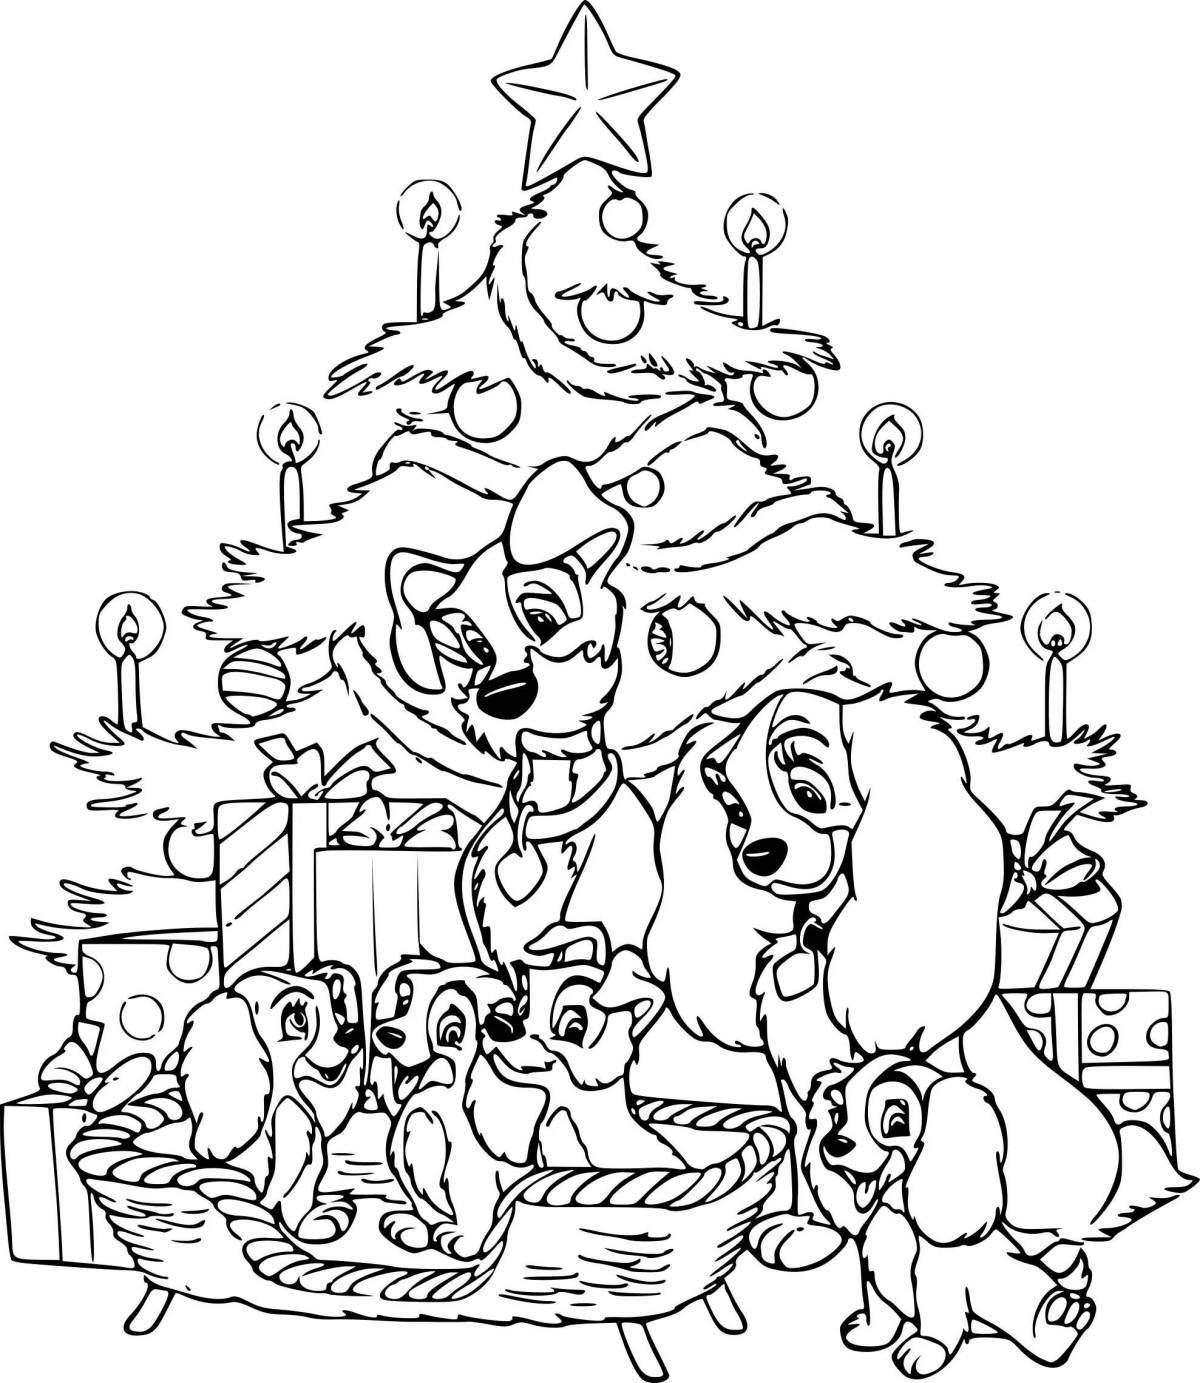 Live cool Christmas coloring book